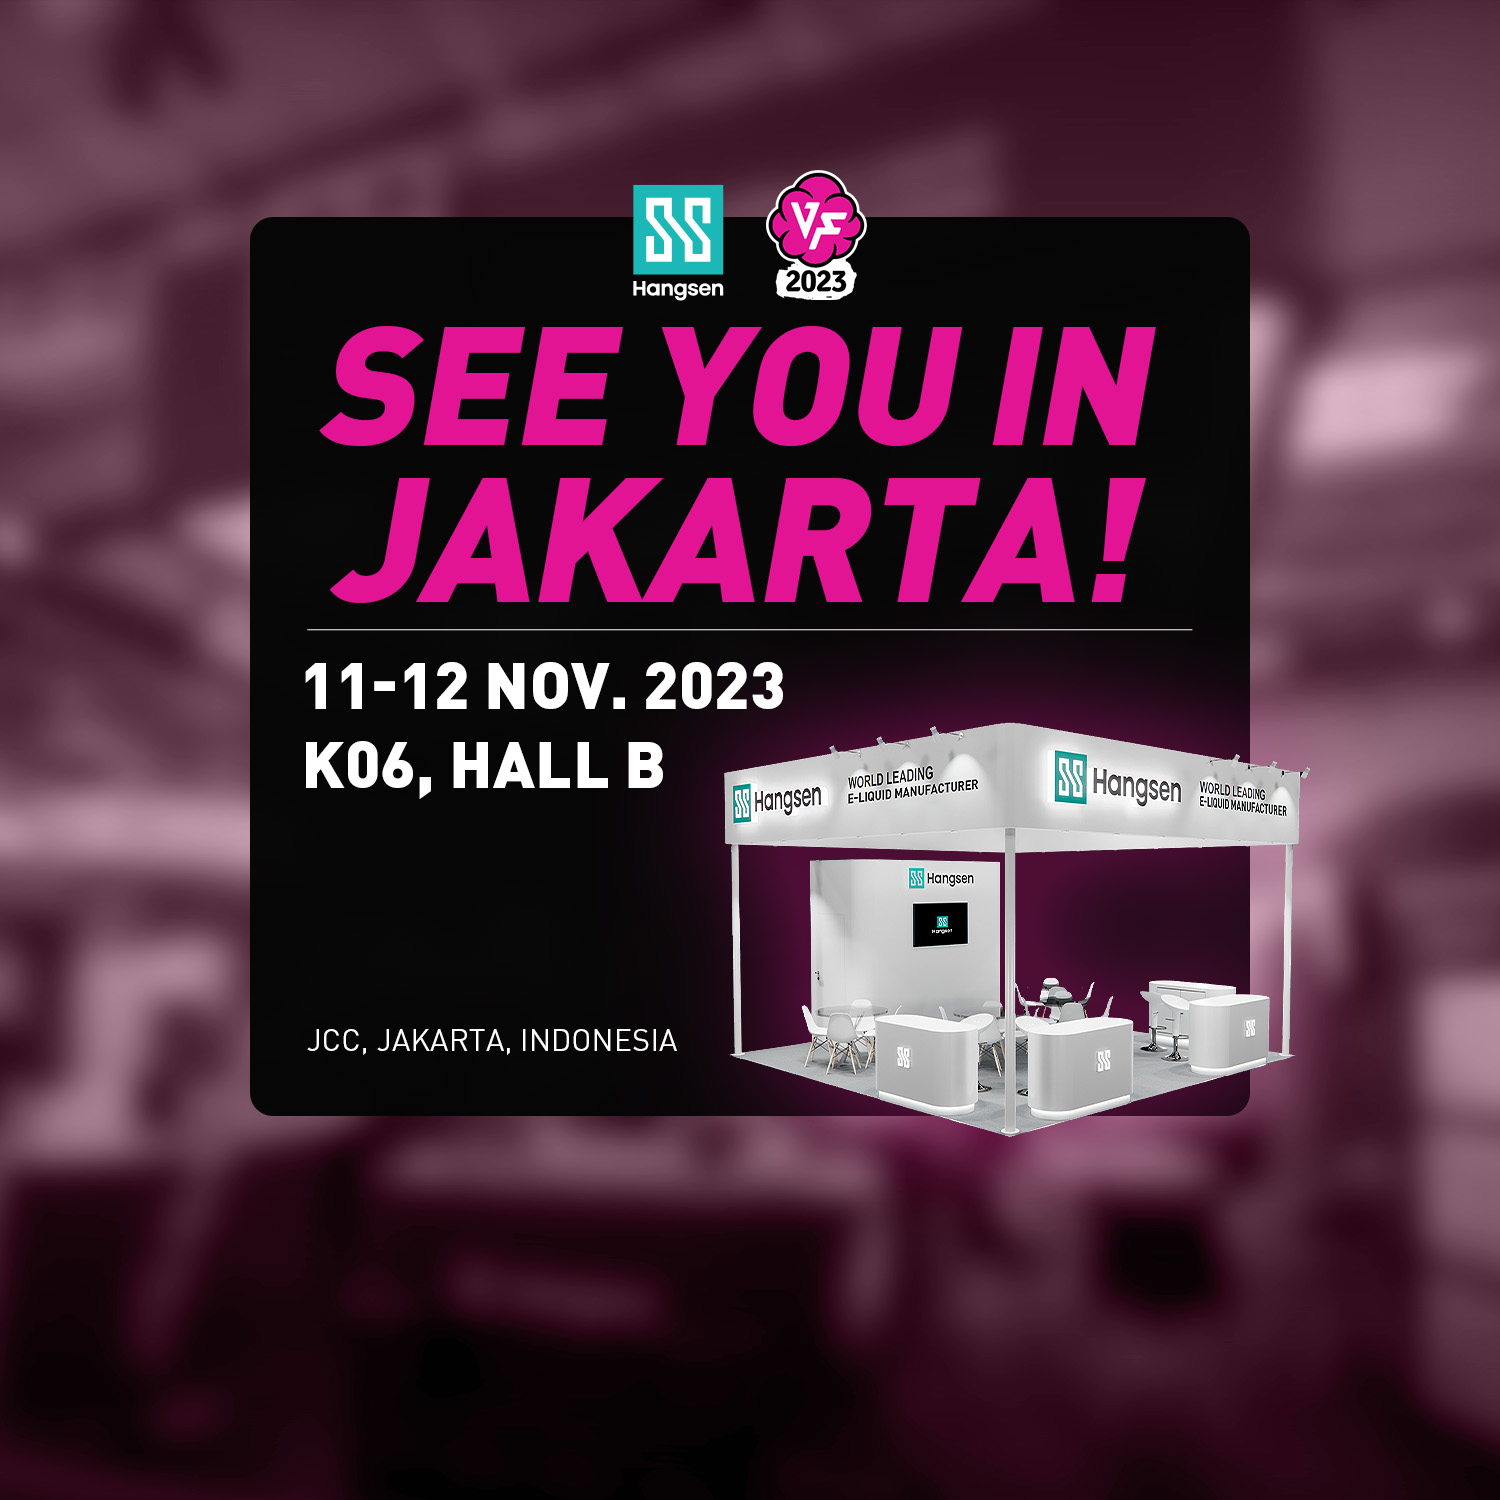 Hangsen has been invited to participate in the Vape Fair 2023 in Jakarta, Indonesia.